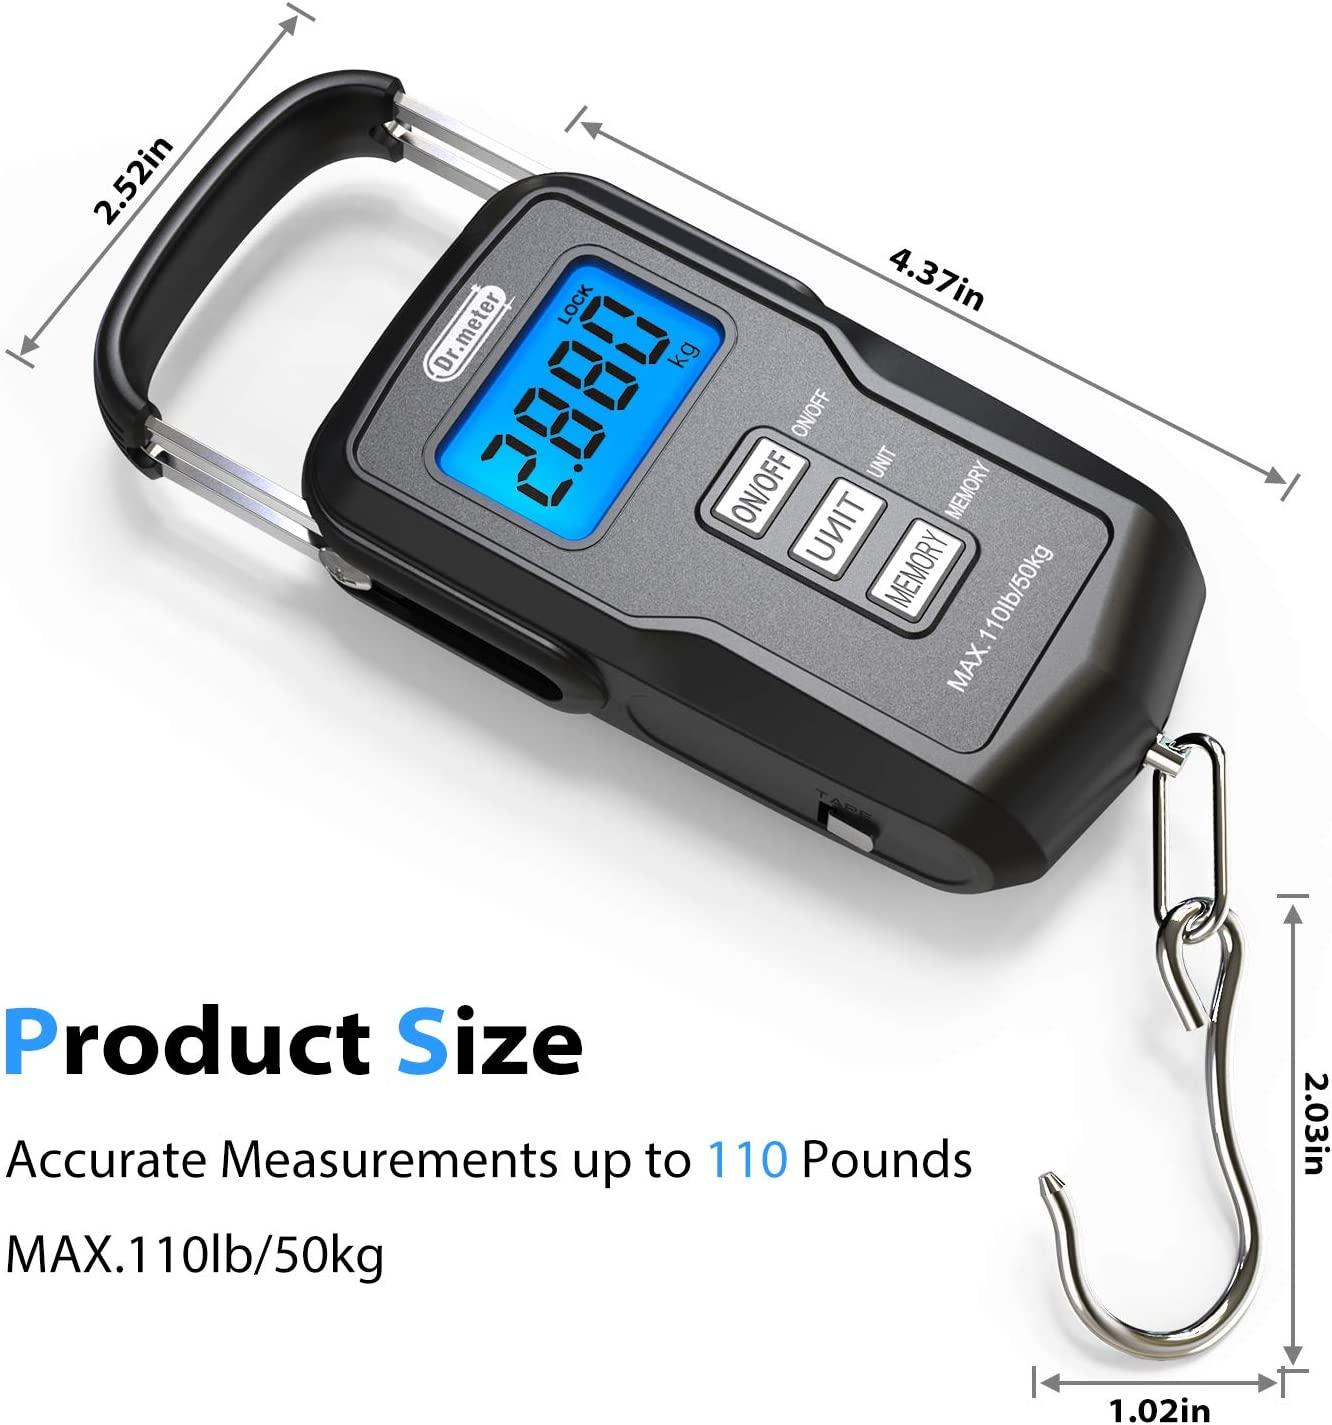 UpgradedFS01 Fishing Scale, Dr.meter 110lb/50kg Digital Hanging Scale with  Storage Function and Numerical Comparison, Backlit LCD Display, Measuring  Tape and 2 AAA Batteries Included